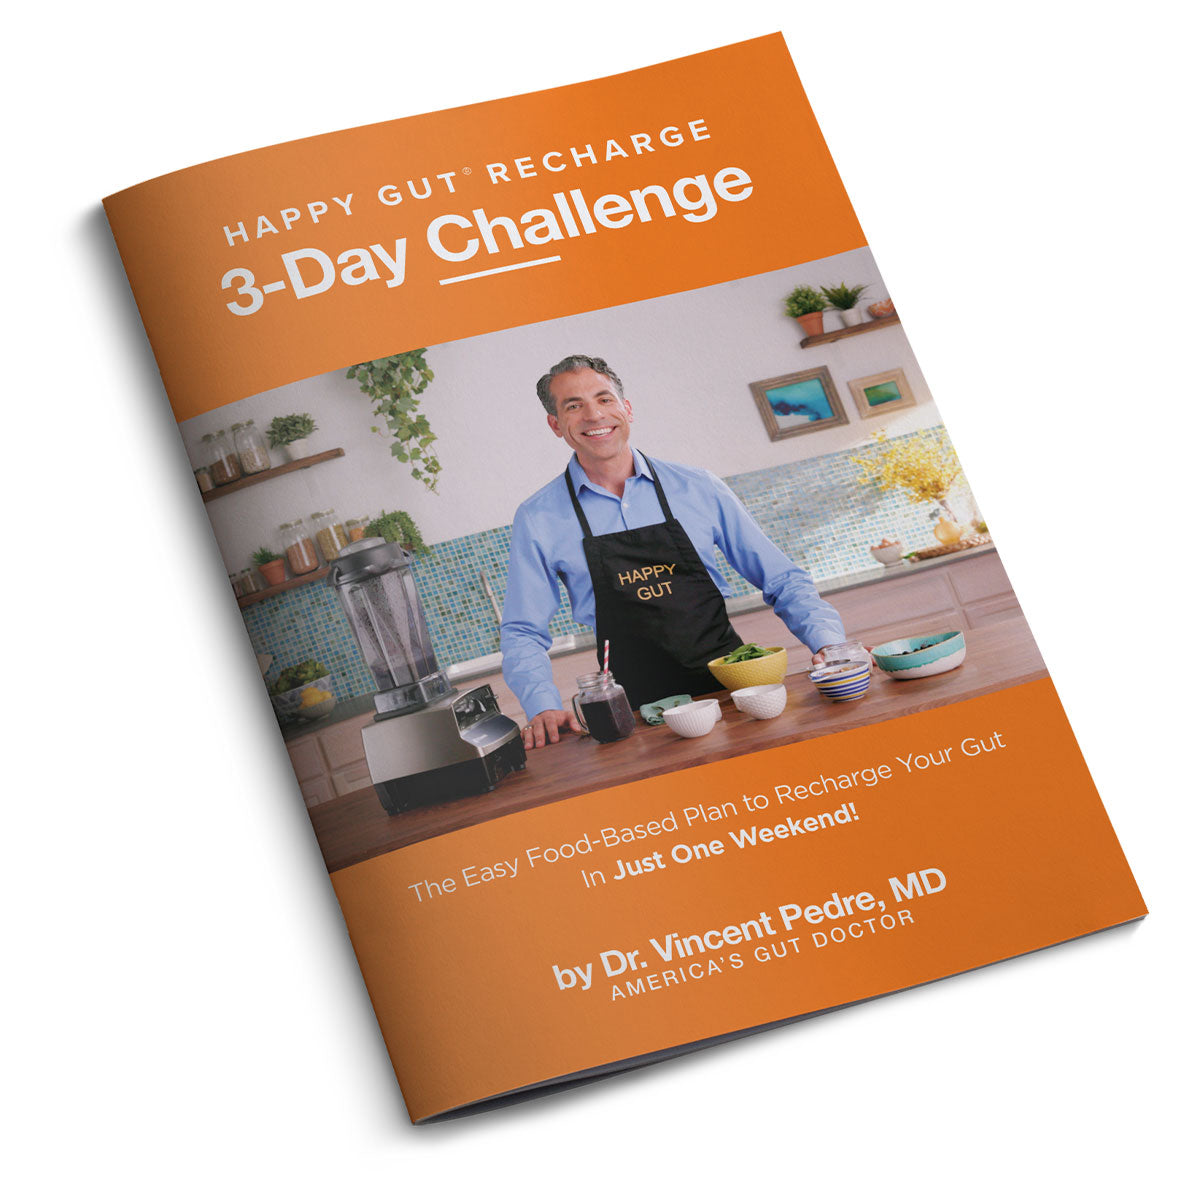 HAPPY GUT® RECHARGE 3-Day Challenge Guide